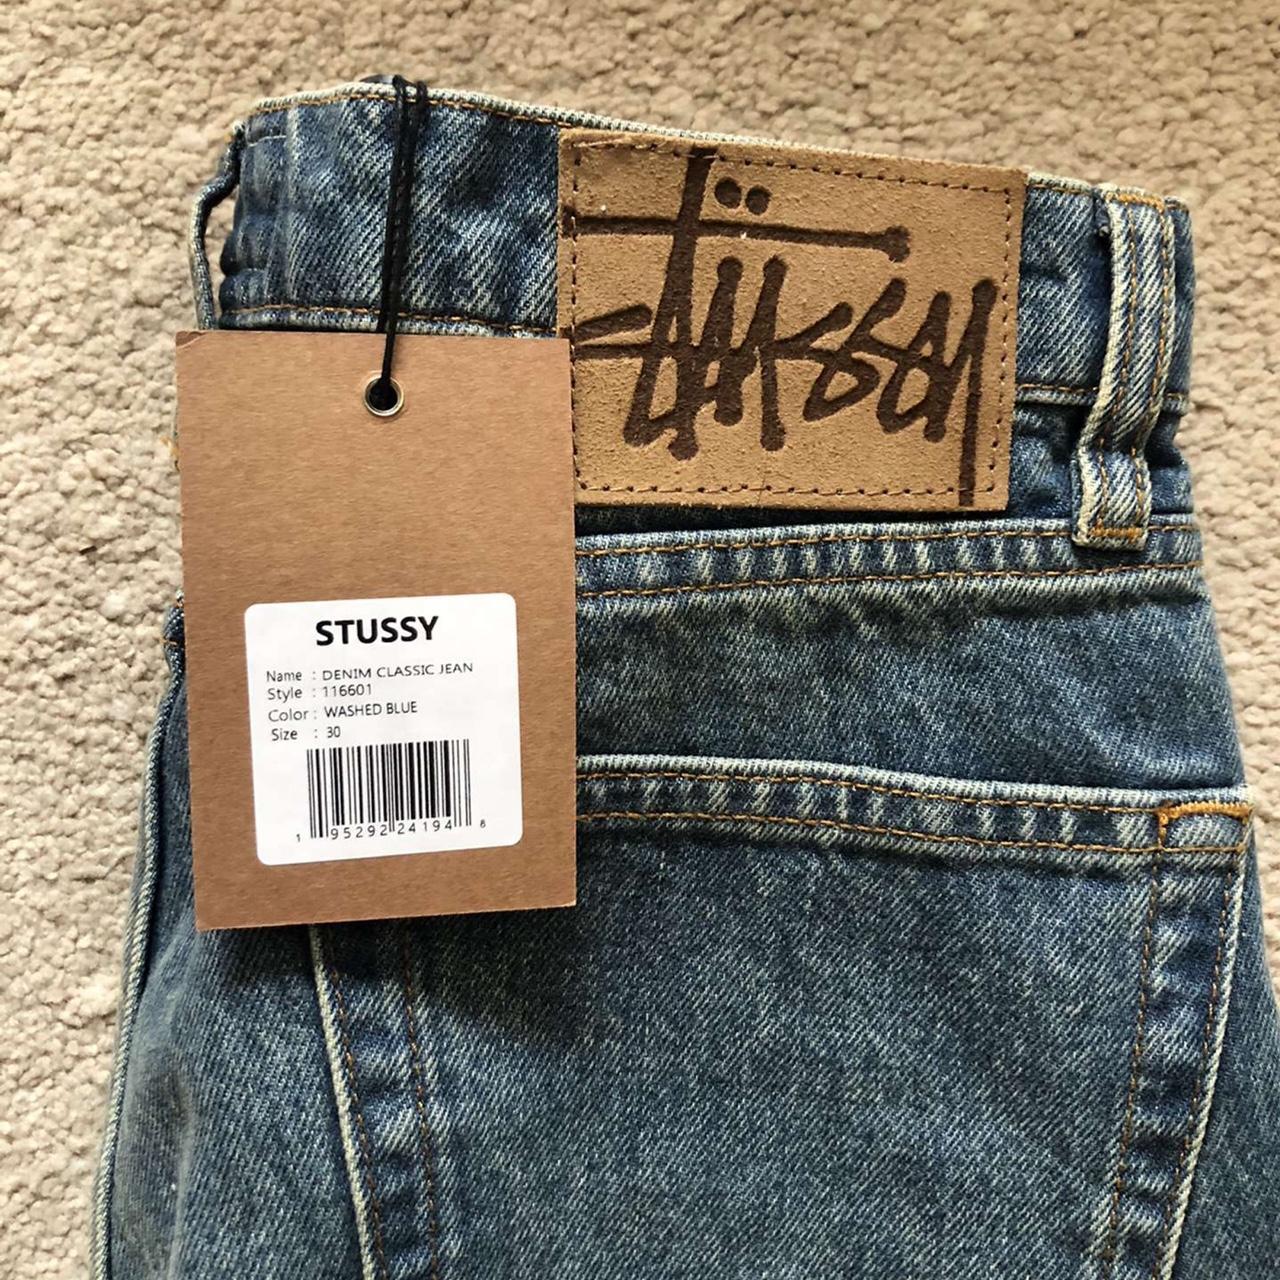 stussy denim classic jean, SOLD SOLD SOLD DO NOT...